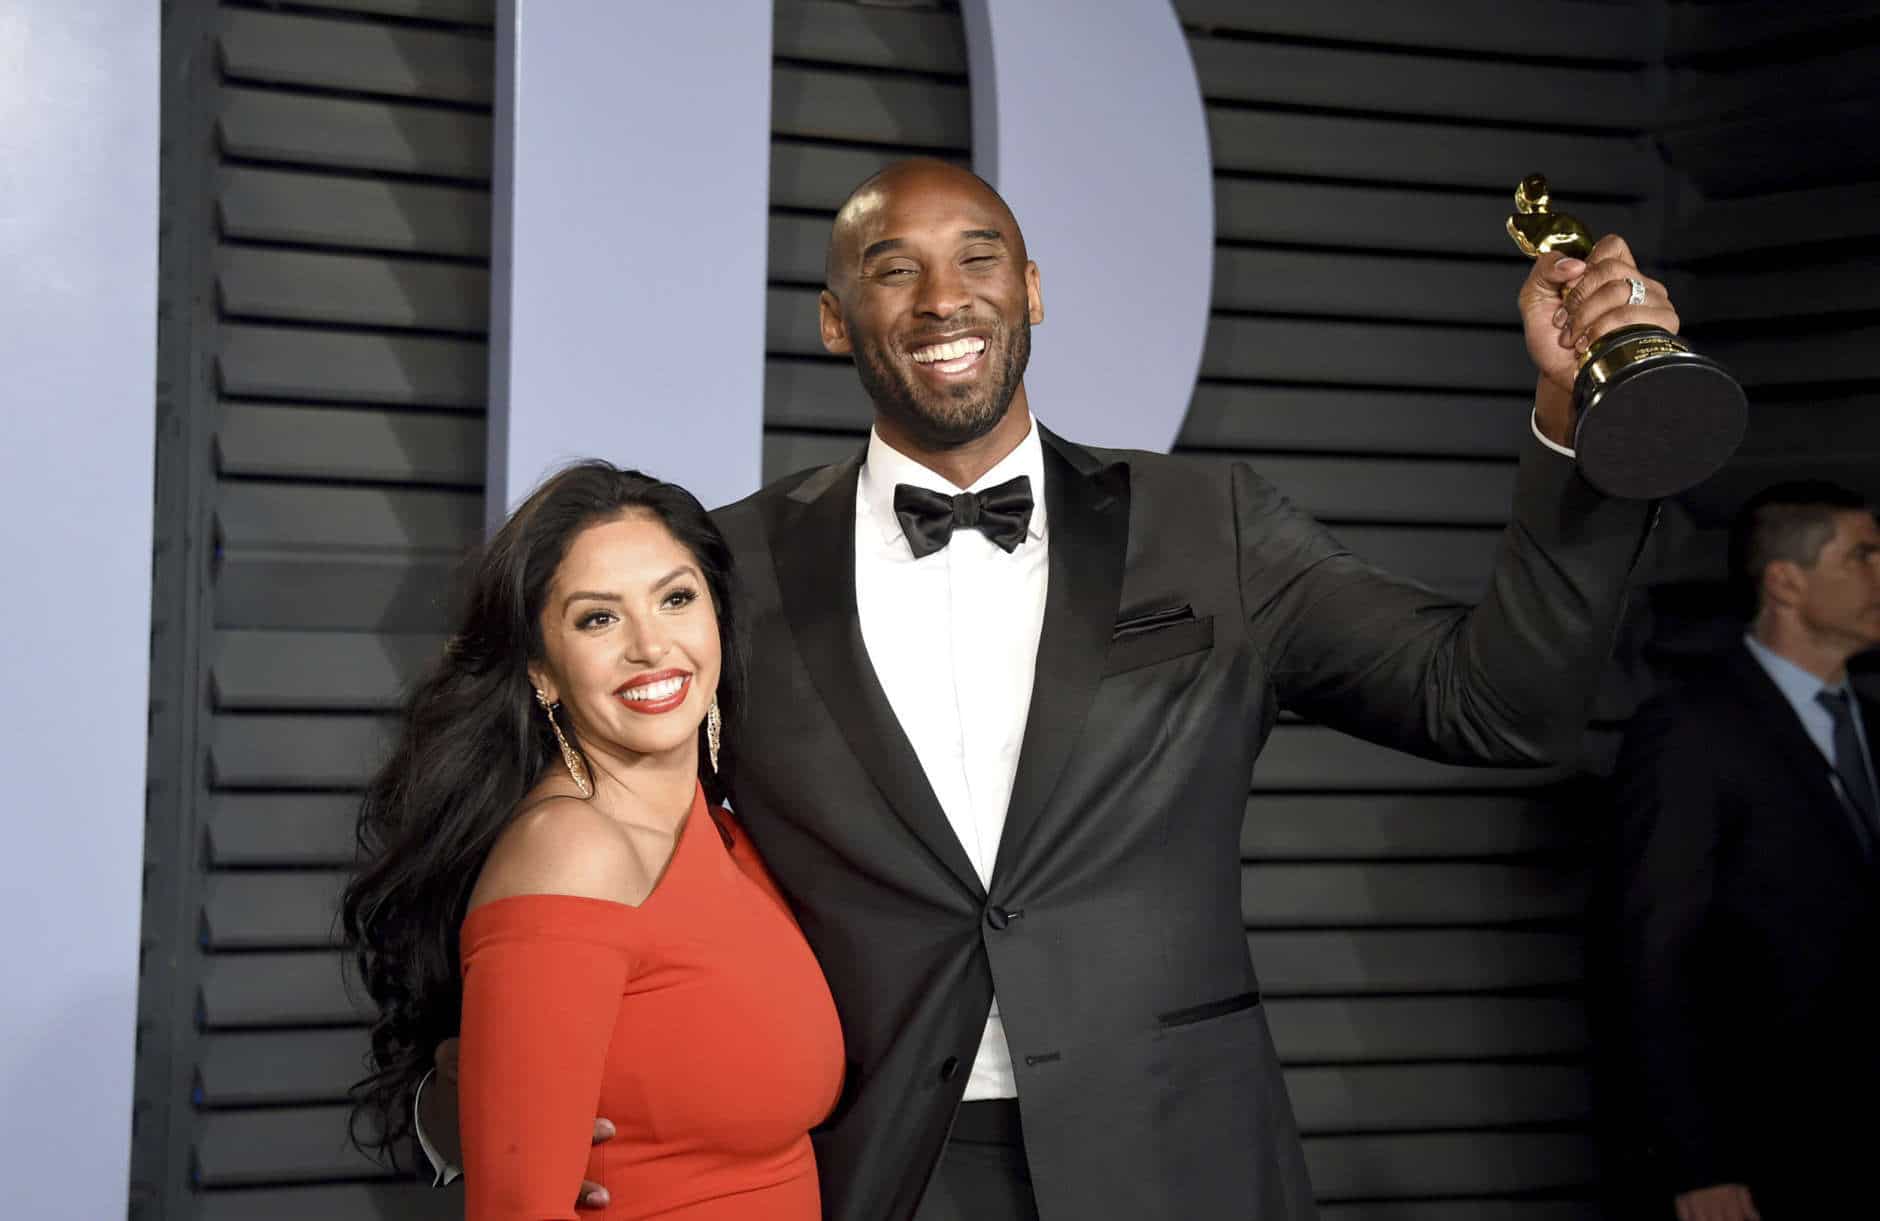 Vanessa Bryant, left, and Kobe Bryant, winner of the award for best animated short for "Dear Basketball", arrive at the Vanity Fair Oscar Party on Sunday, March 4, 2018, in Beverly Hills, Calif. (Photo by Evan Agostini/Invision/AP)